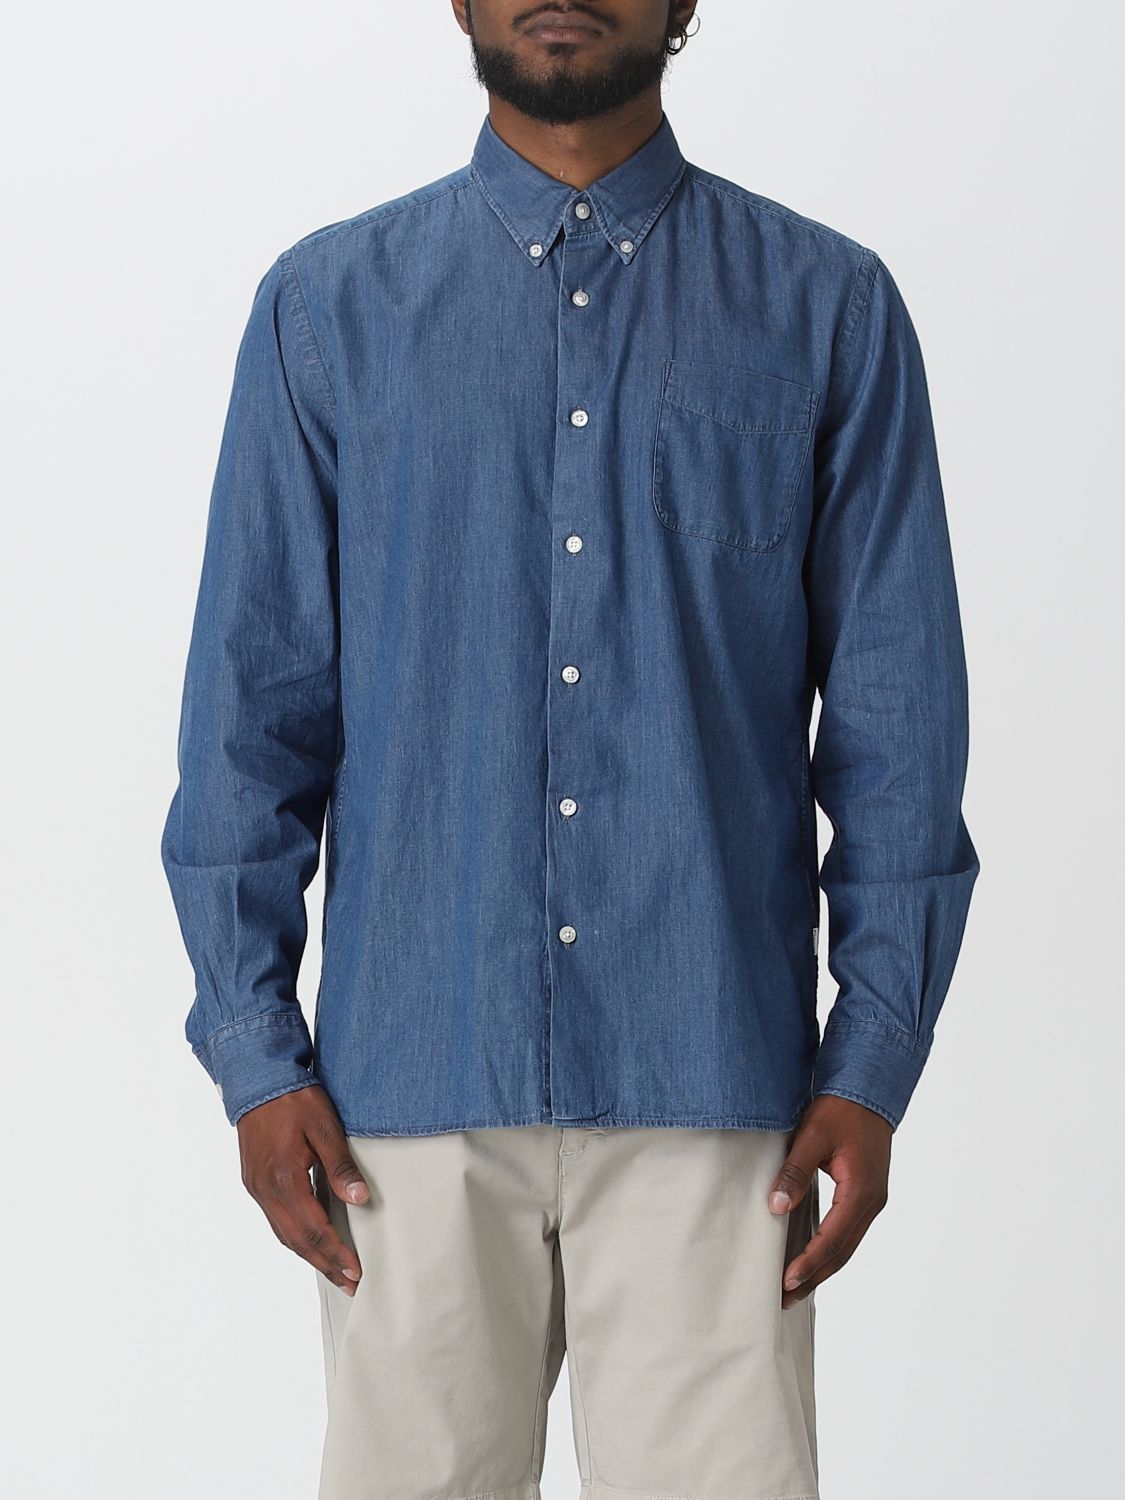 WOOLRICH: shirt for man - Stone Washed | Woolrich shirt ...